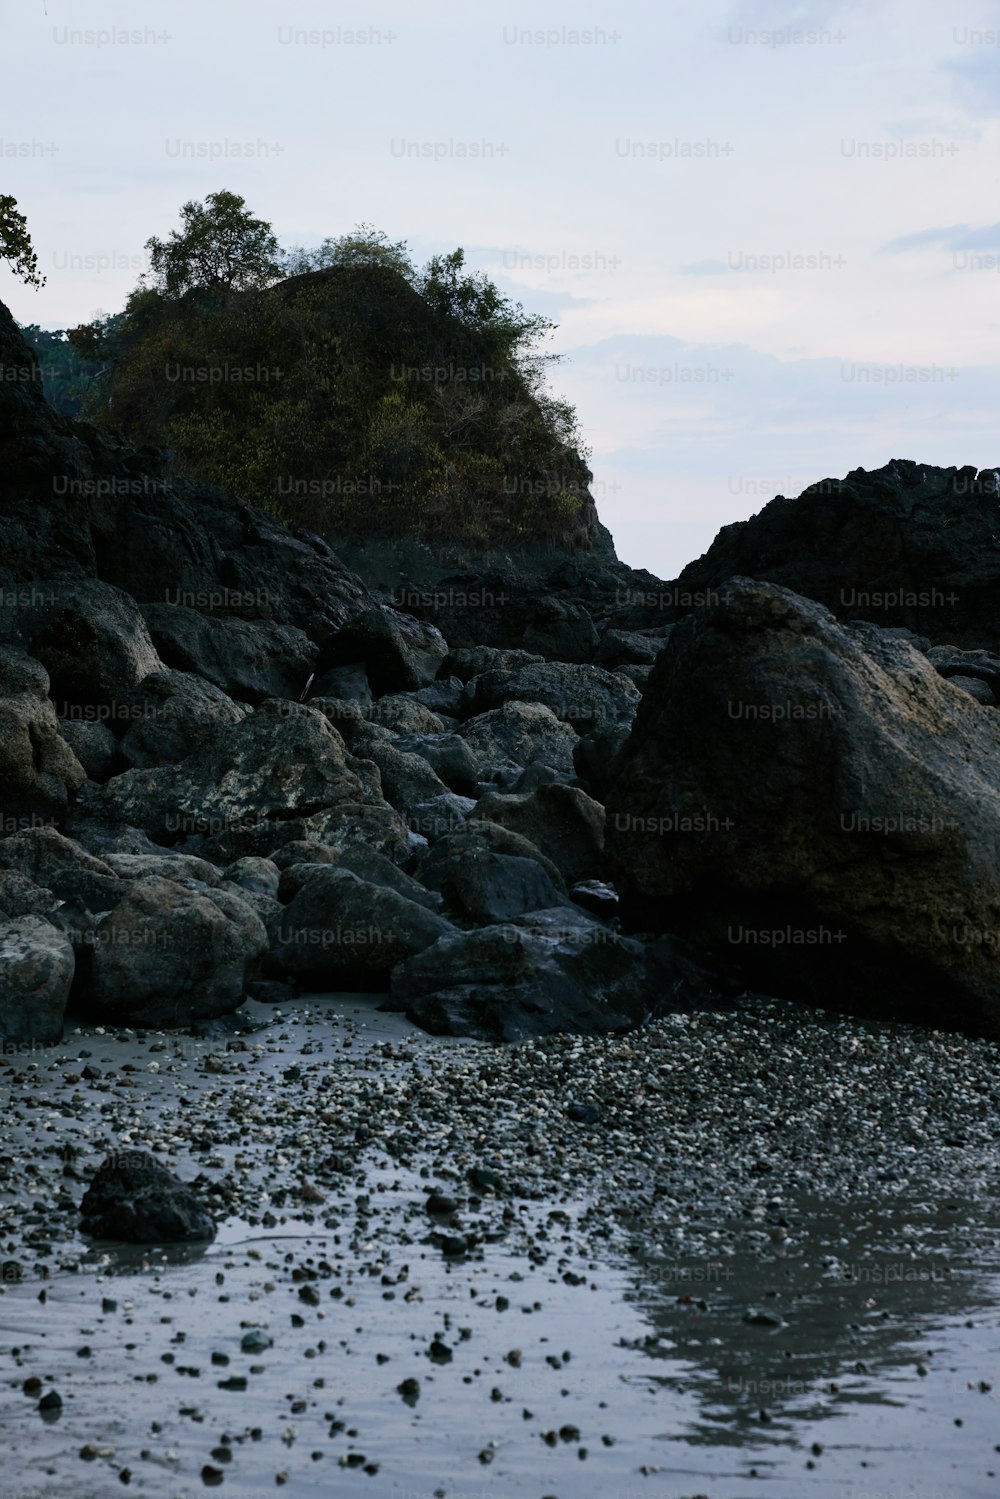 a rocky beach area with rocks and water